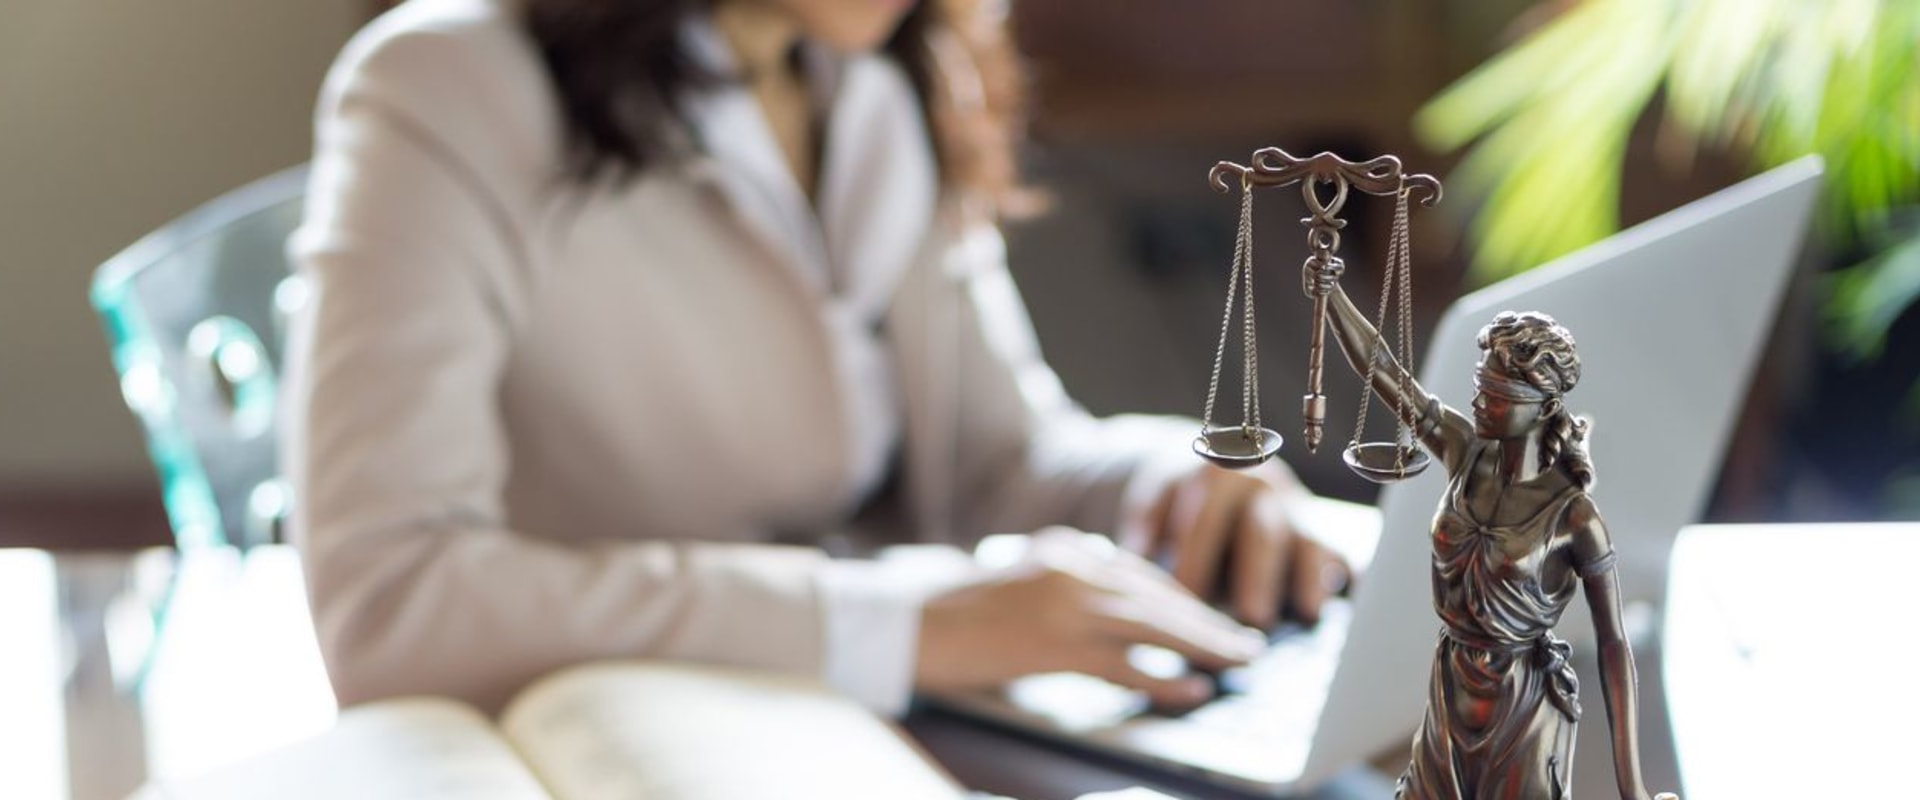 What type of attorney gets paid the most?